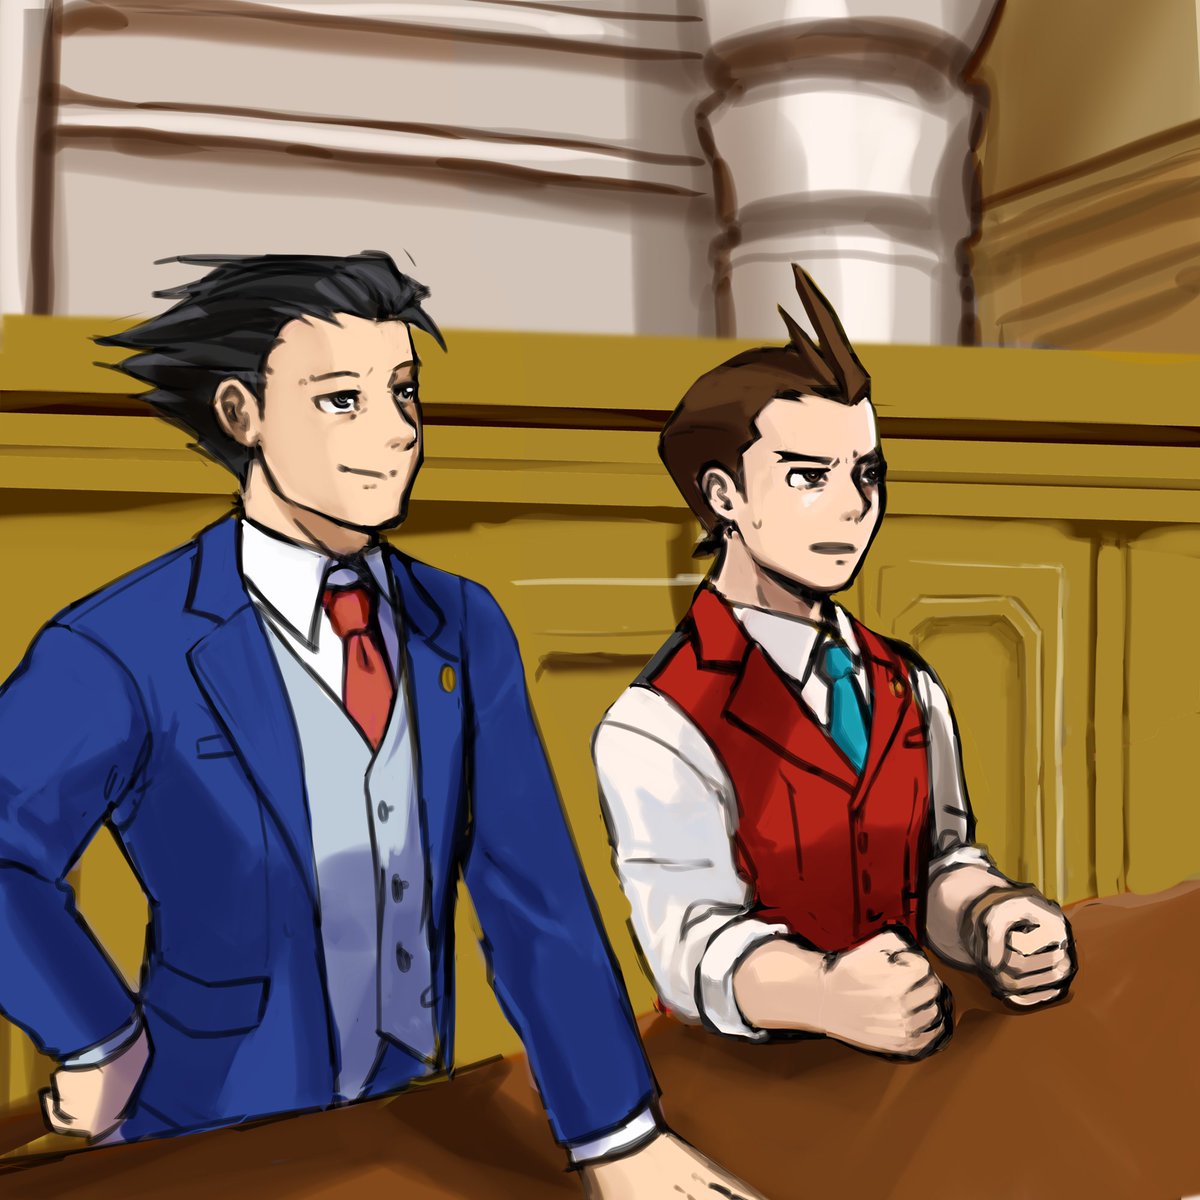 edgeworth taking seb under his wing,,,,,,,,,,,,    apprentices and mentors facing off......................     look i can dream............................

#aceattorney 